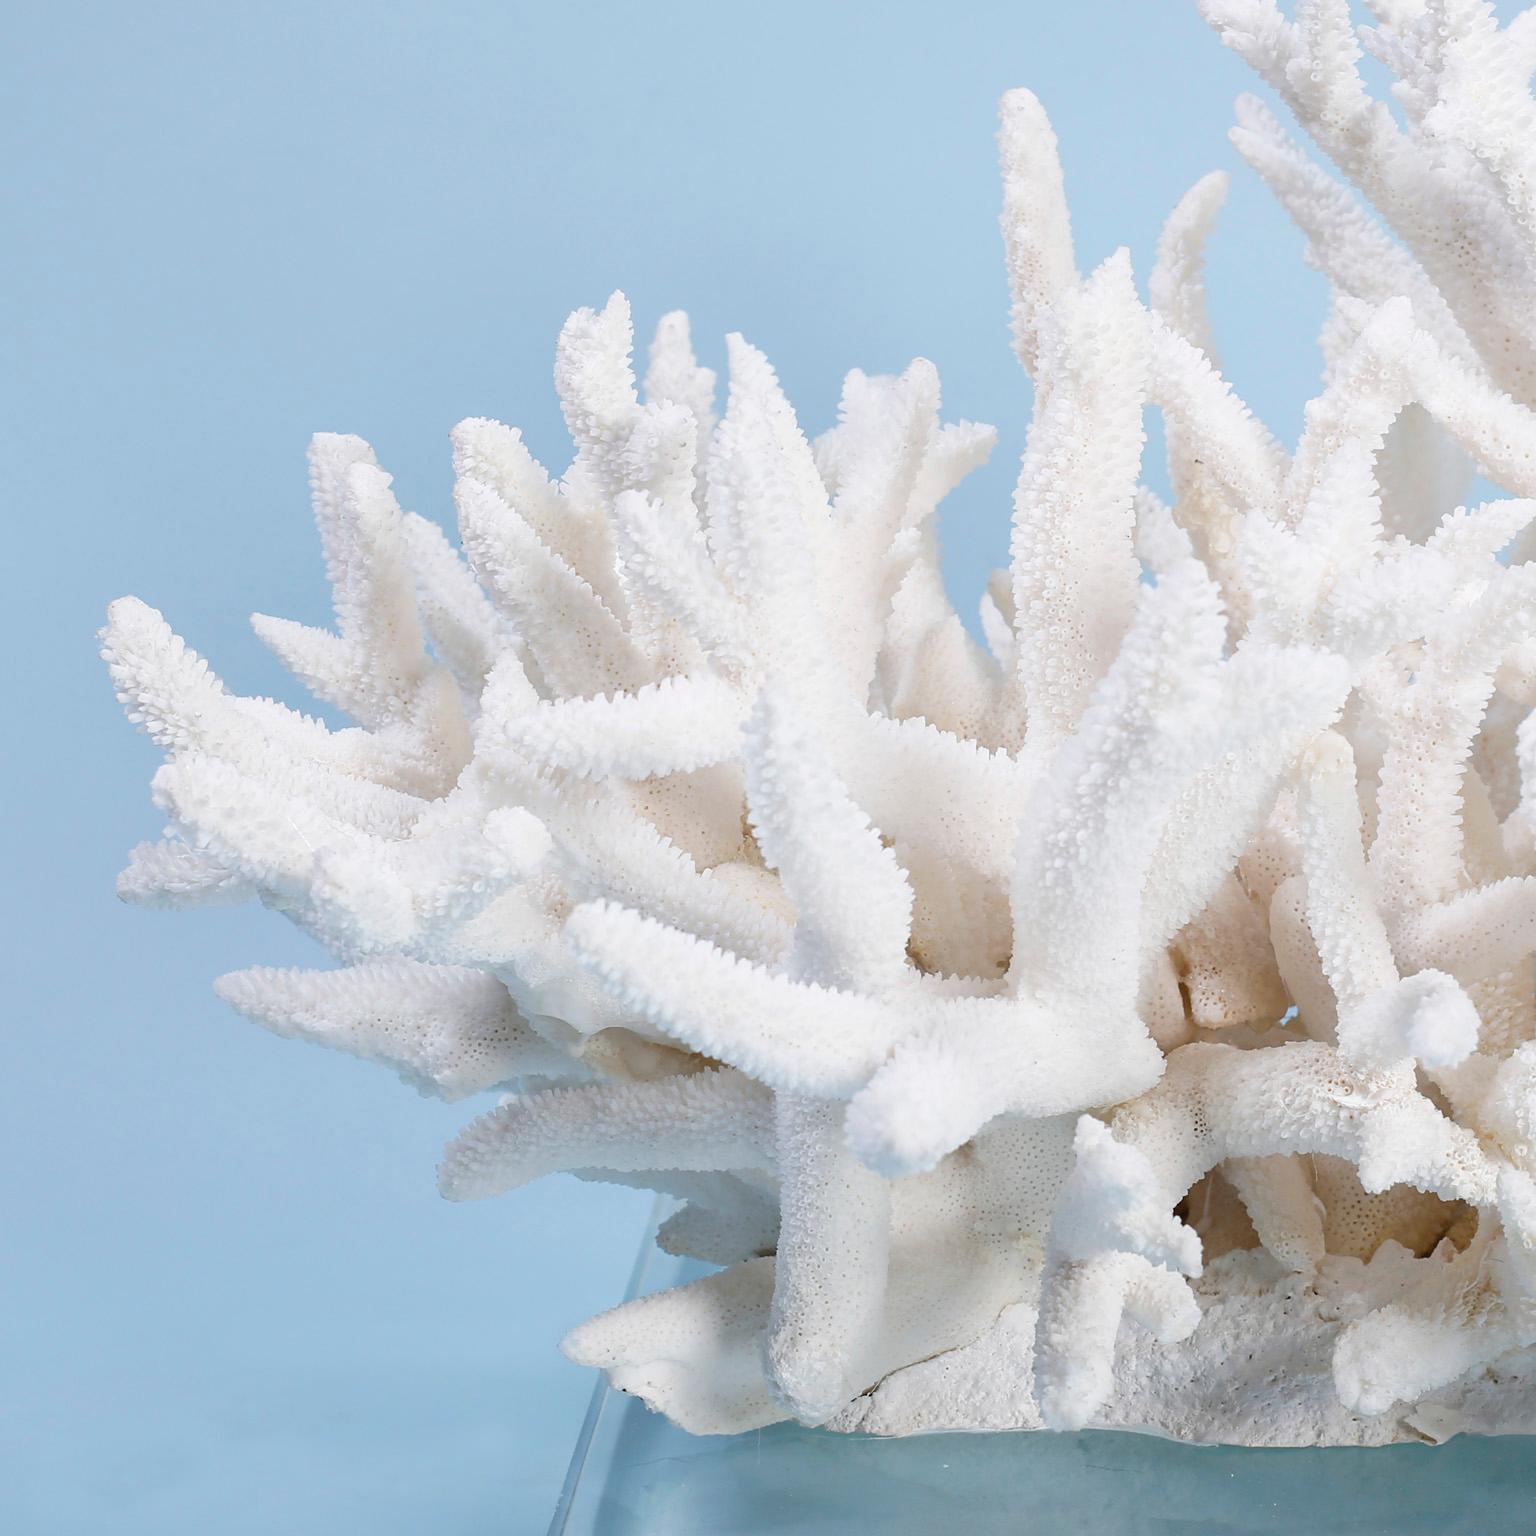 Impressive white Staghorn coral sculpture with its clean bleached color and sea inspired texture. Custom designed and assembled by FS Henemader. Presented on a 14 x 10 inch Lucite base. 

Coral being exported outside of the USA, requires special